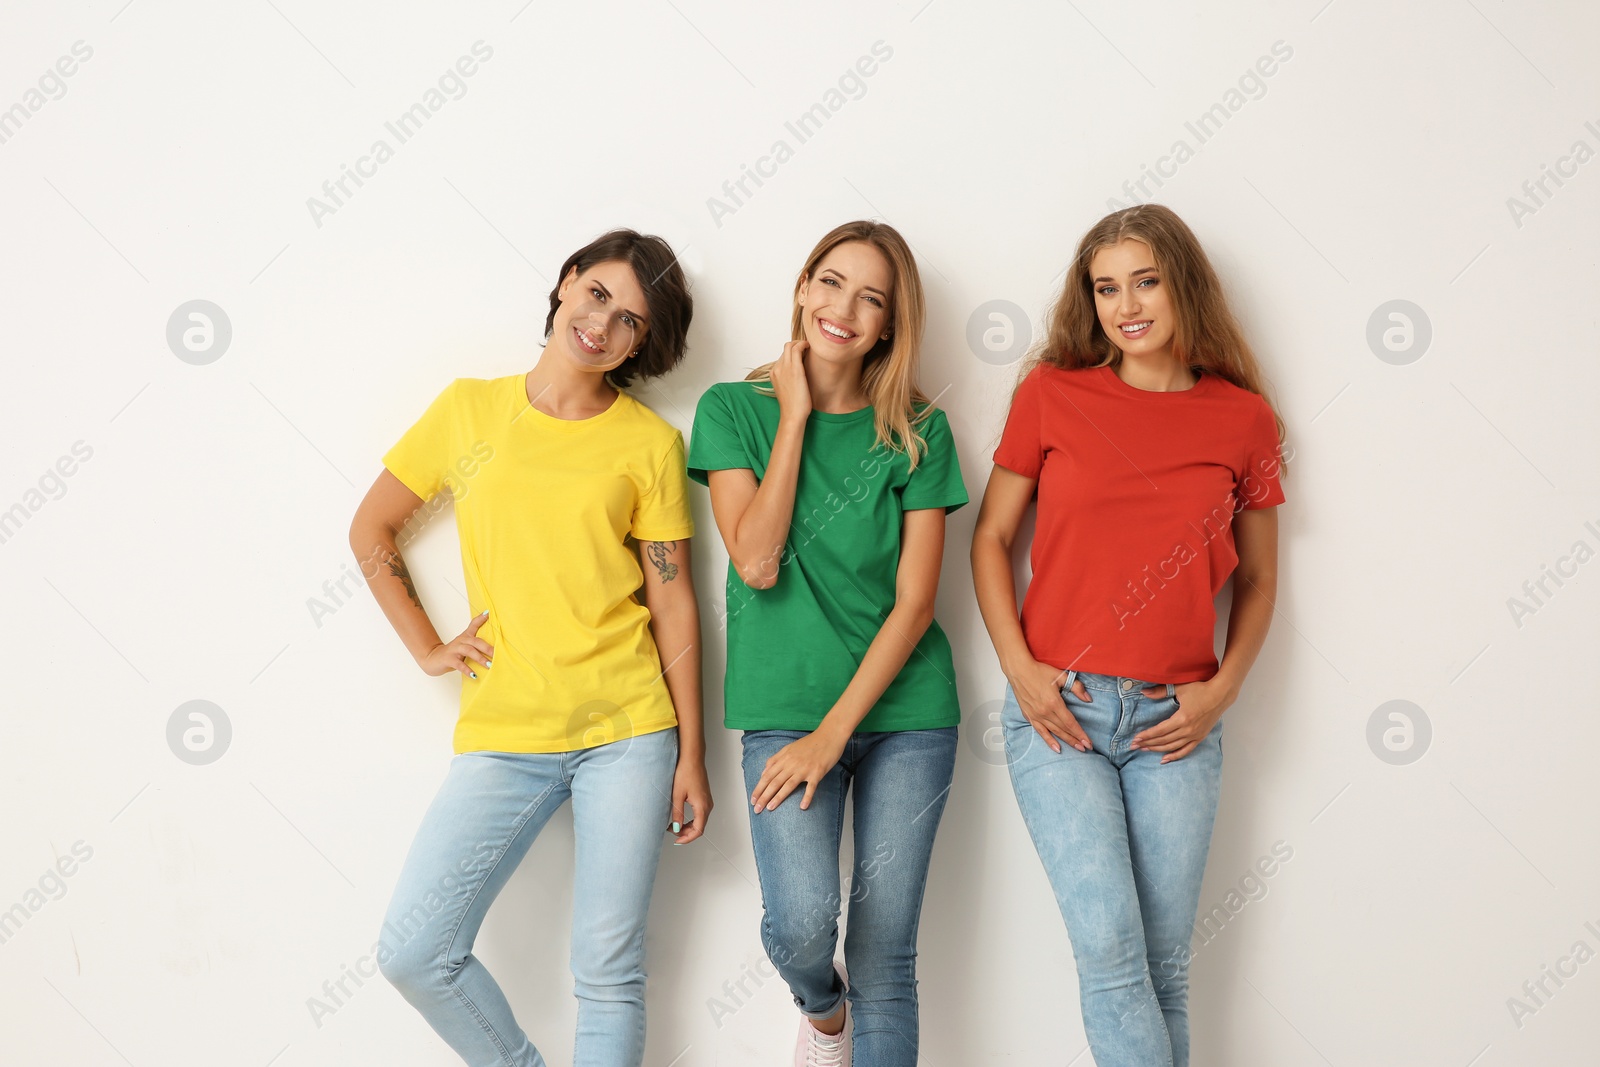 Photo of Group of young women in jeans and colorful t-shirts on light background